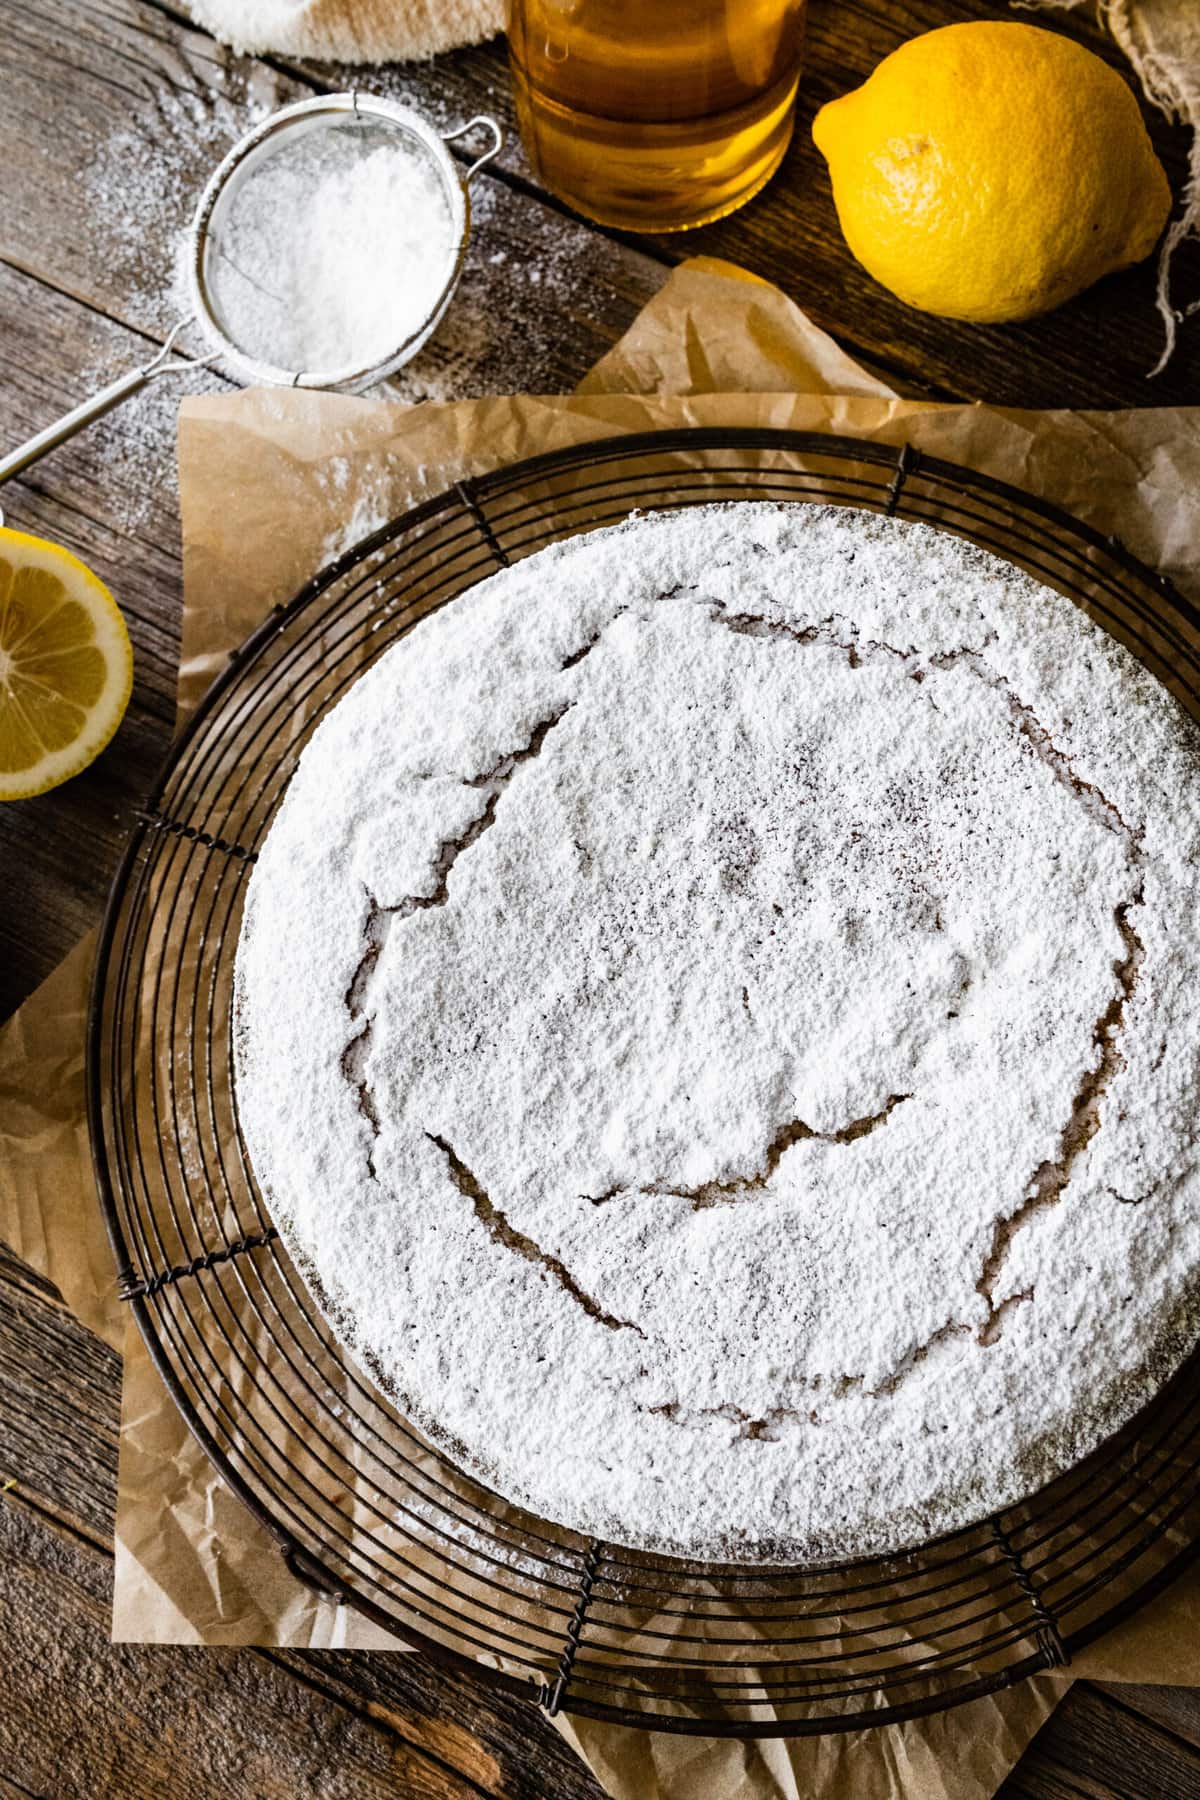 baked best olive oil cake with powdered sugar on a cooling rack with lemons around and bottle of olive oil.